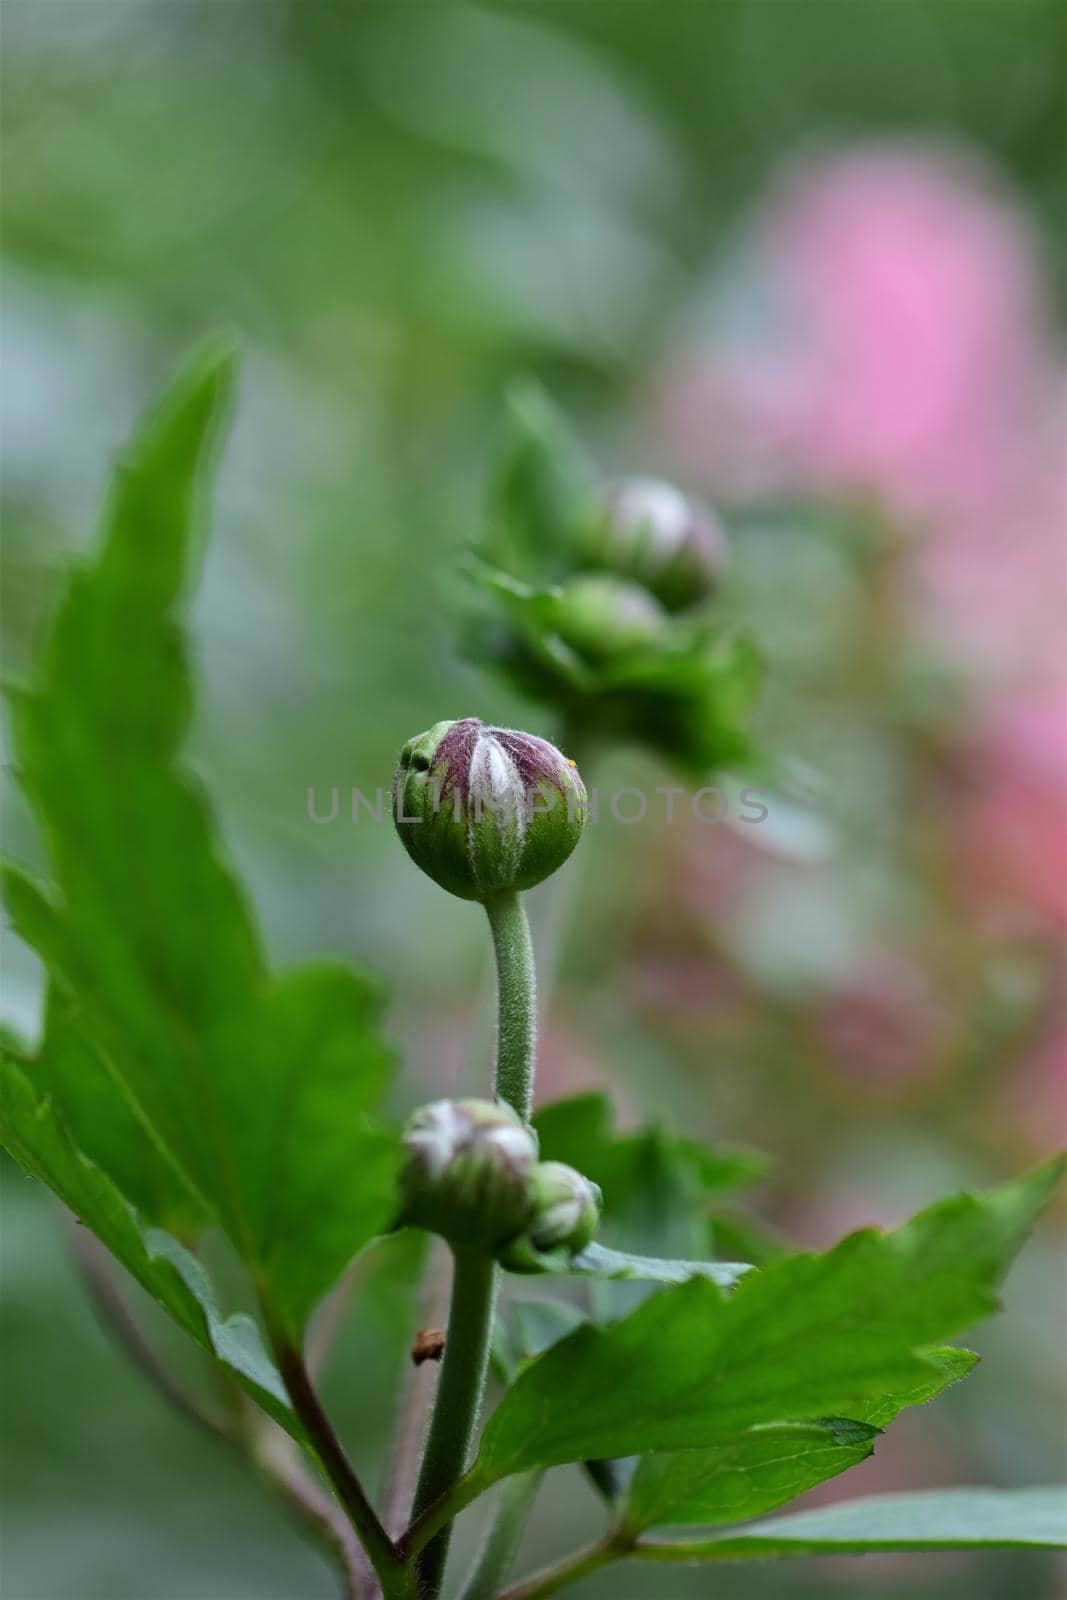 Autumn anemone buds against a blurred green background as a close up